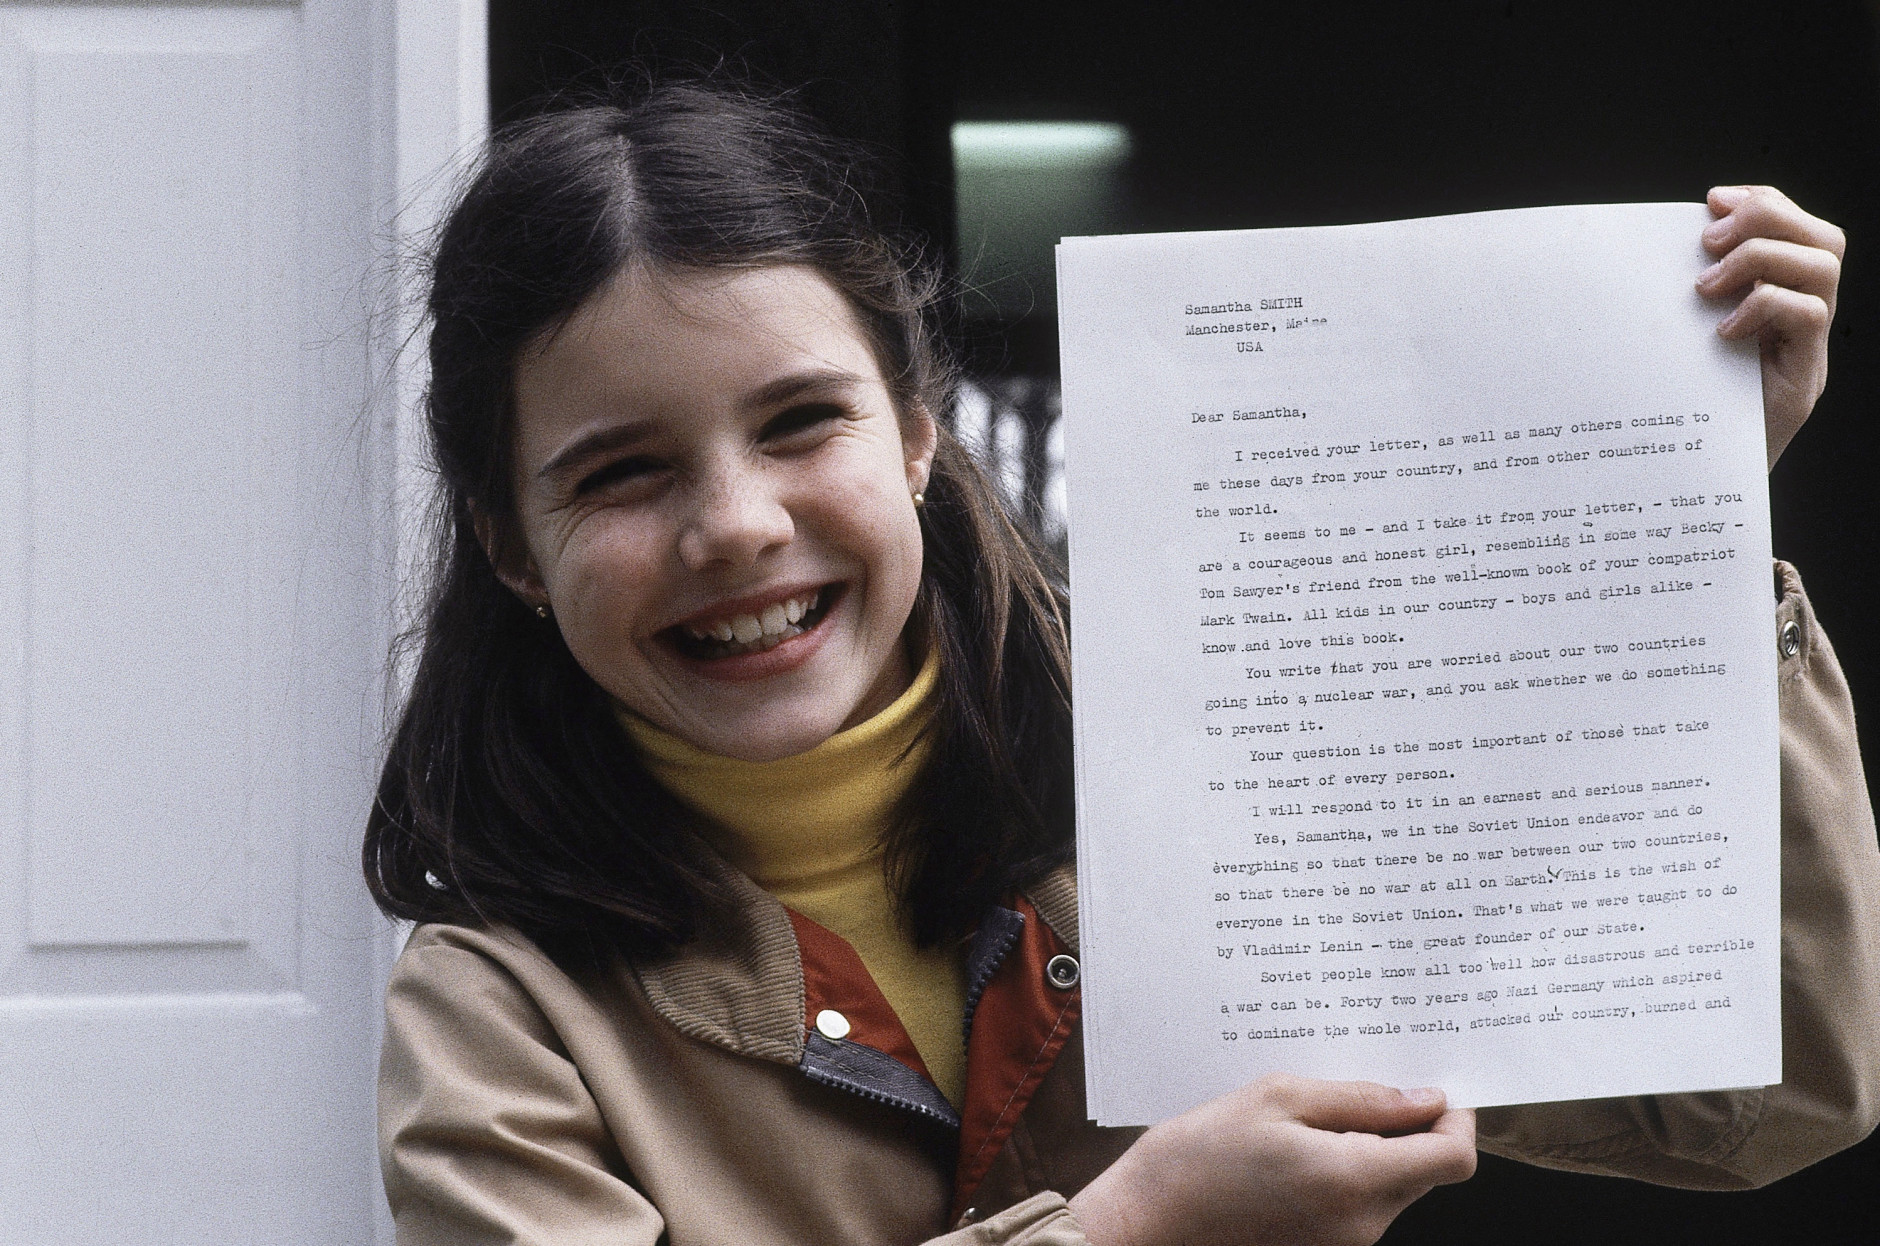 On August 25, 1985, Samantha Smith, 13, the schoolgirl whose letter to Yuri V. Andropov resulted in her famous peace tour of the Soviet Union, died with her father, Arthur, and six other people in a commuter plane crash in Auburn, Maine. Here, Smith holds the letter she received from Andropov on April 26, 1983. (AP Photo/Patricia Wellenbach)